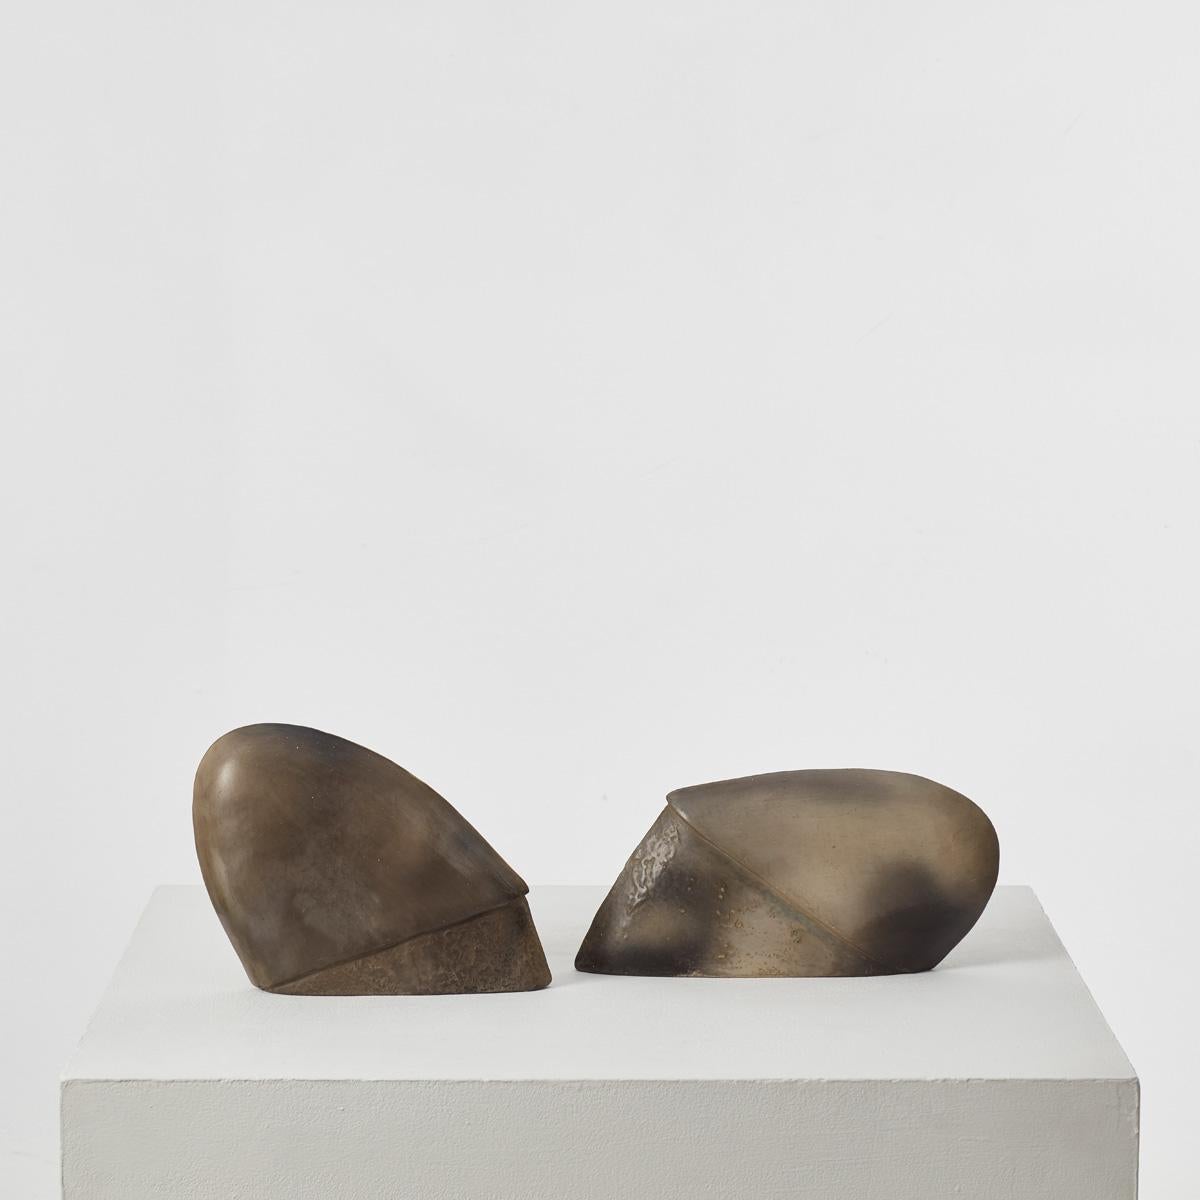 British Pair of Two-Tone Organic Sculptures from the Collection of Sir Terence Conran For Sale